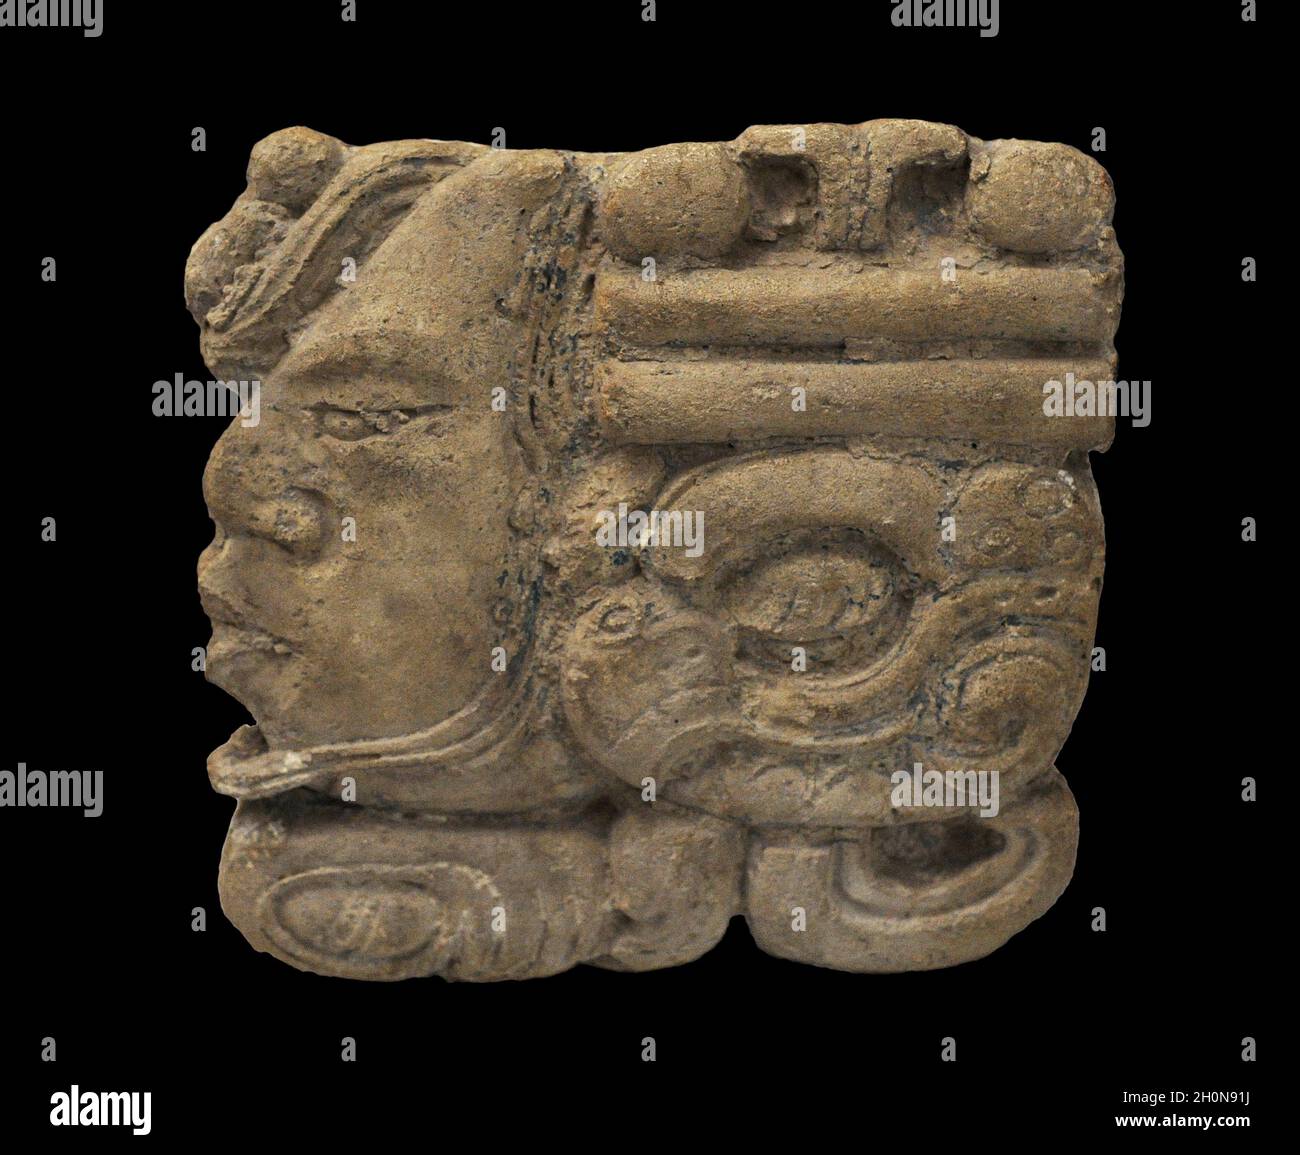 Numerical glyph depicting numeral 4. Palenque. Maya culture. Late Classic period (600-900 AD). Located on the facade of the Palace. It was collected i Stock Photo